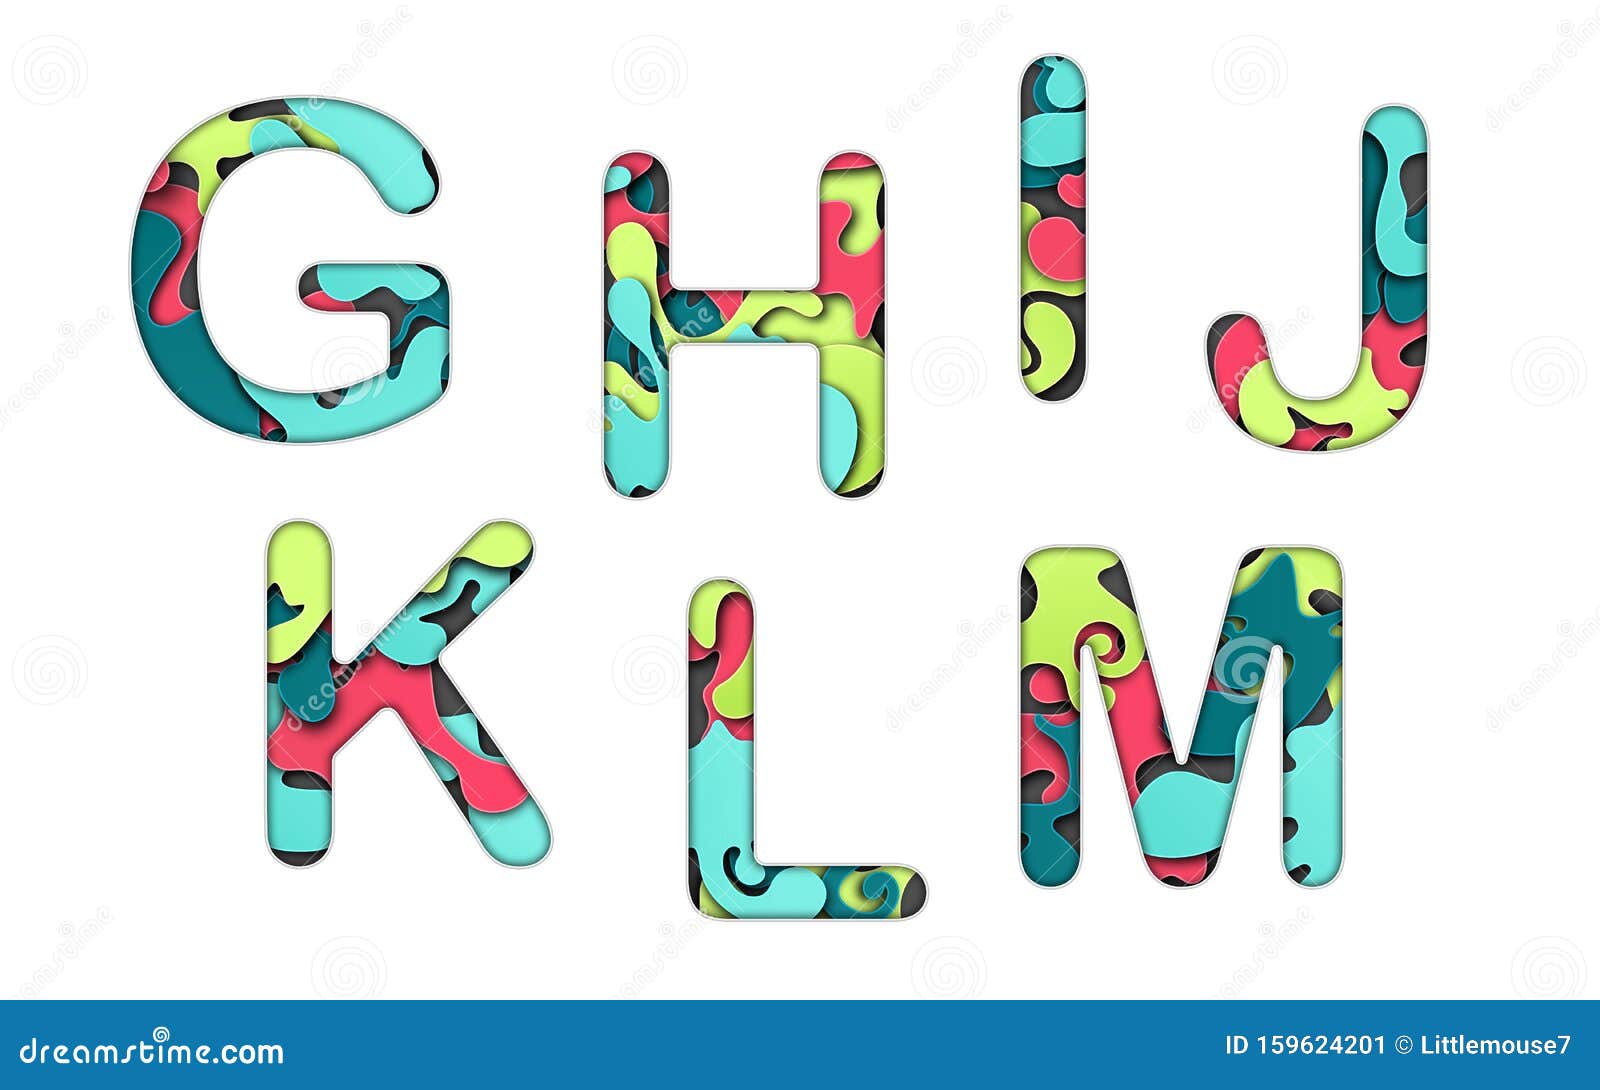 set of letters font g, h, i, j, k, l and m. multilayer colorful letters. paper art carving. creative typography